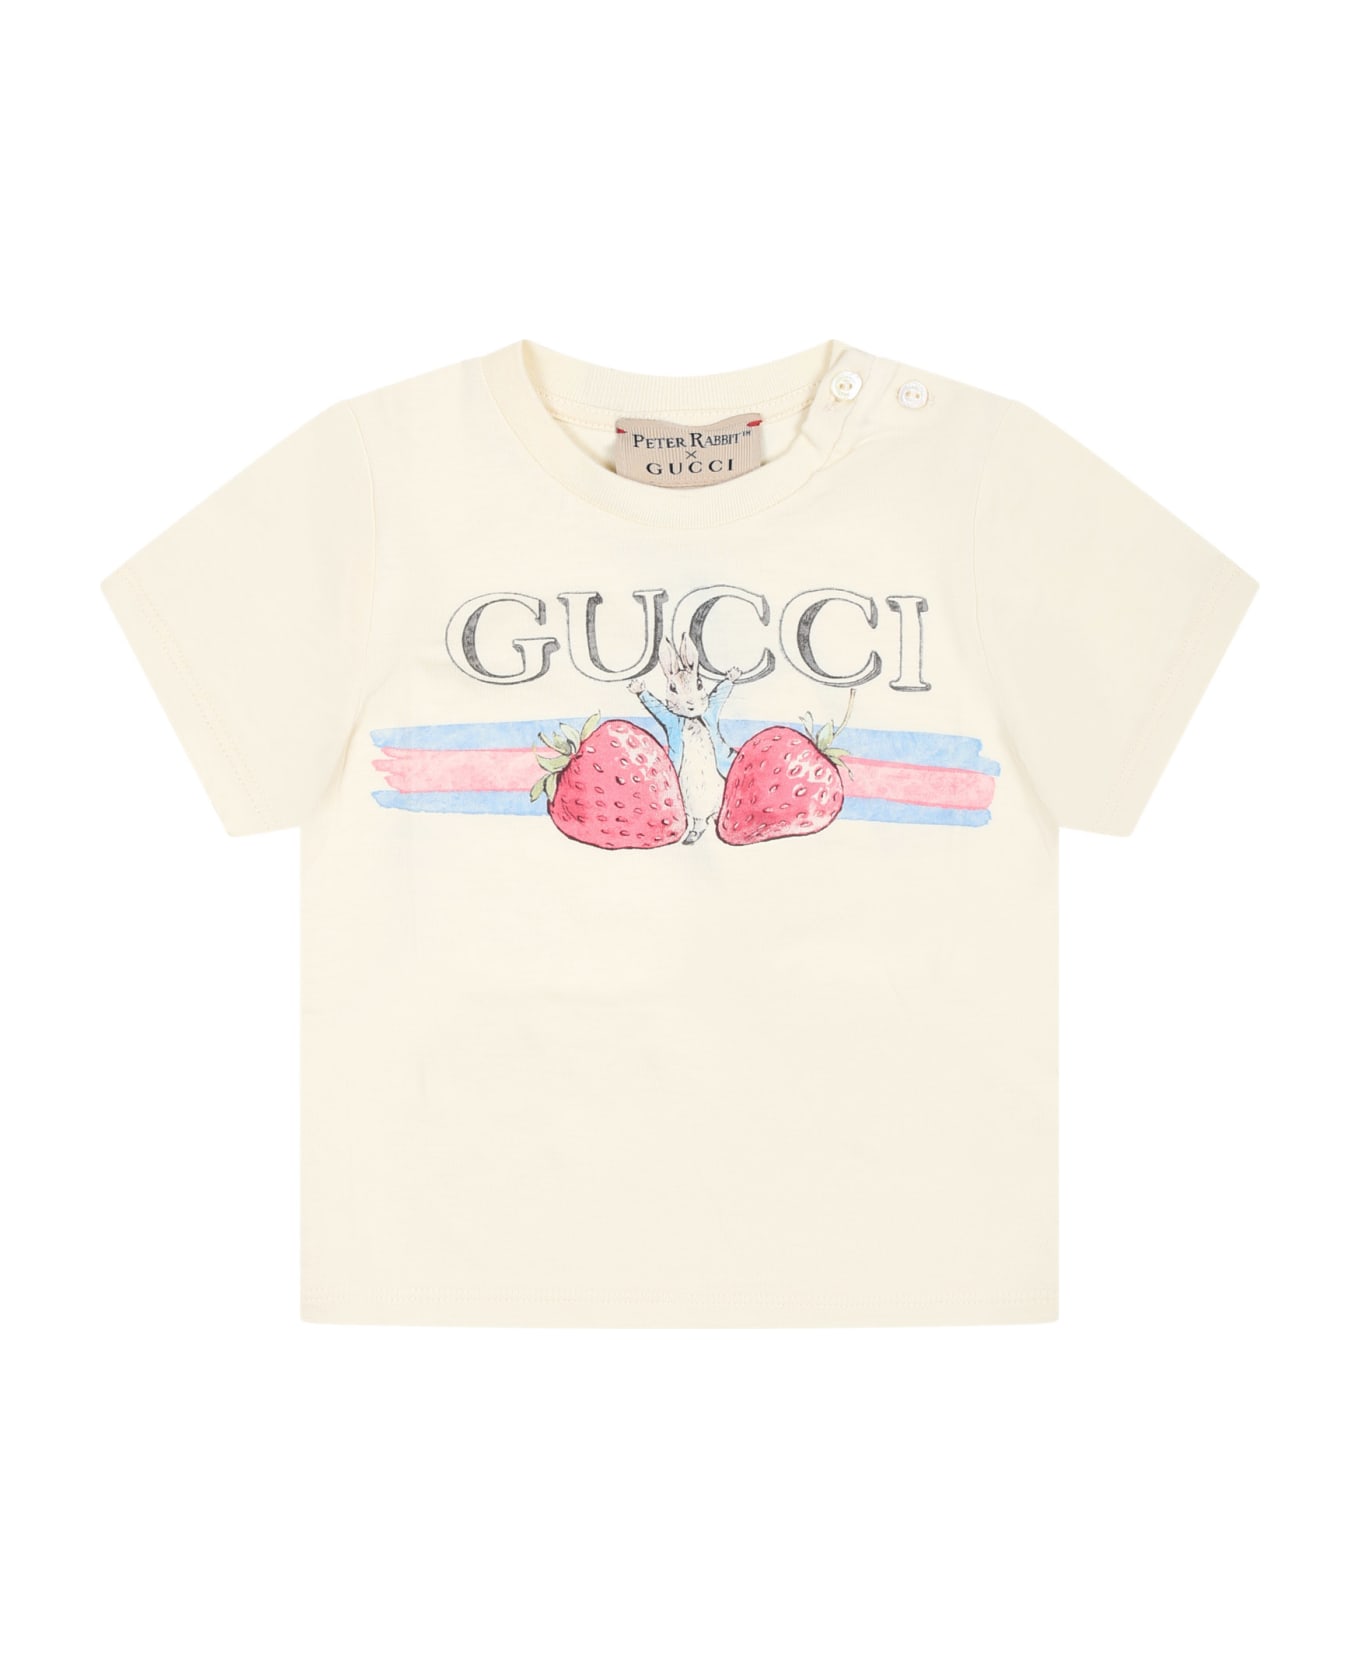 Gucci Ivory T-shirt For Baby Girl With Peter Rabbit - IVORY